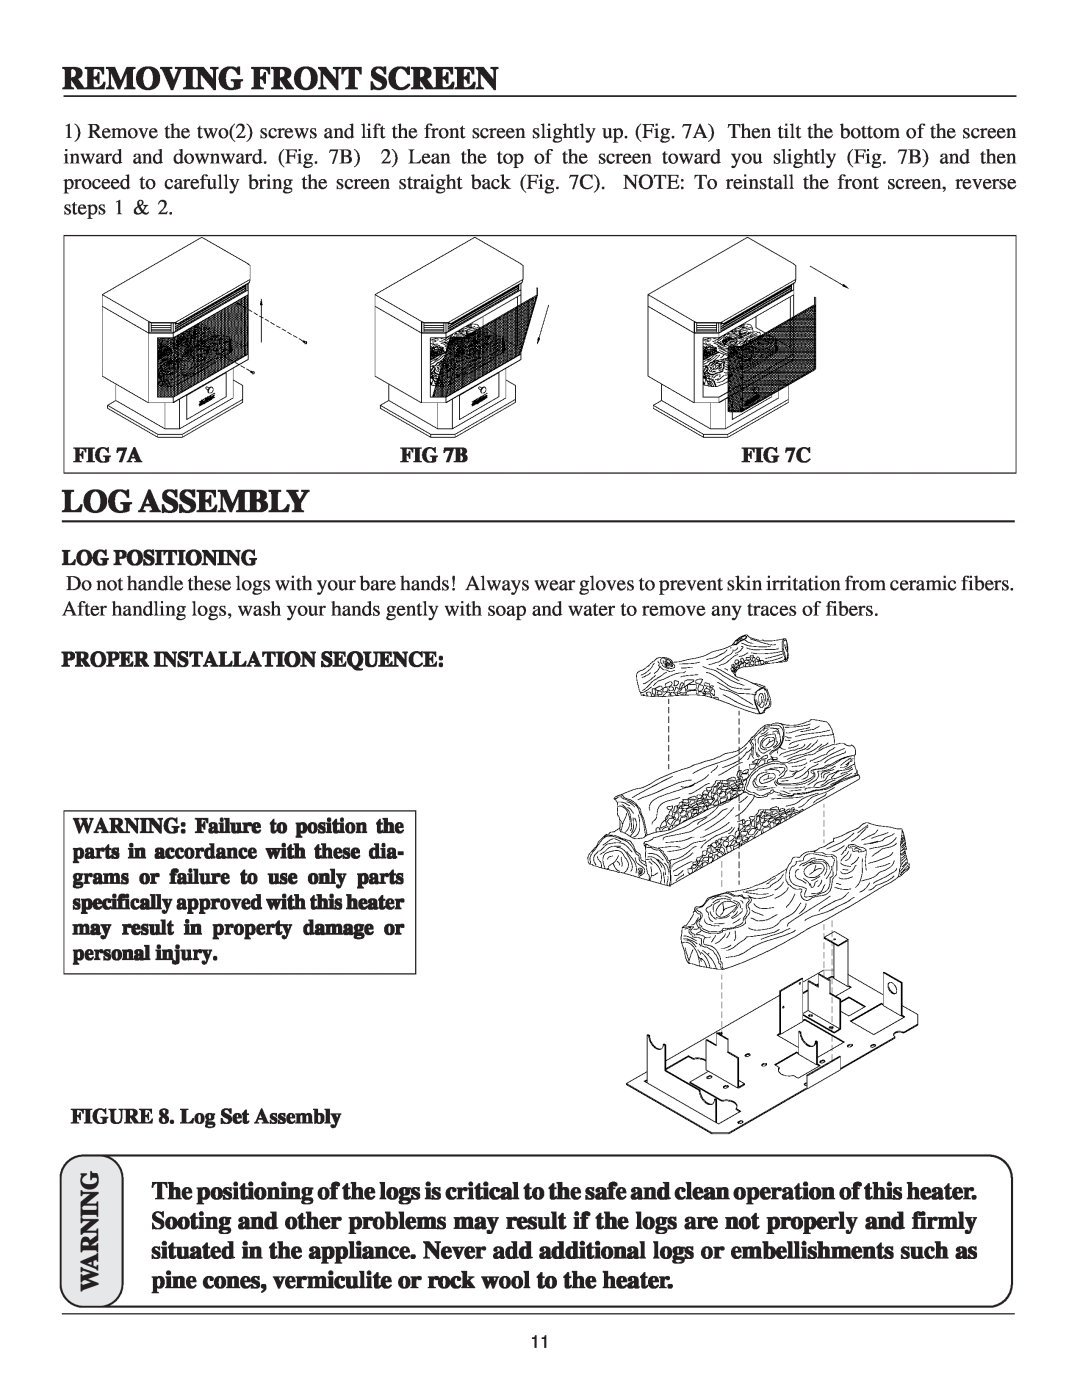 United States Stove B9945N manual Removing Front Screen, Log Assembly, C, Log Positioning, Proper Installation Sequence 